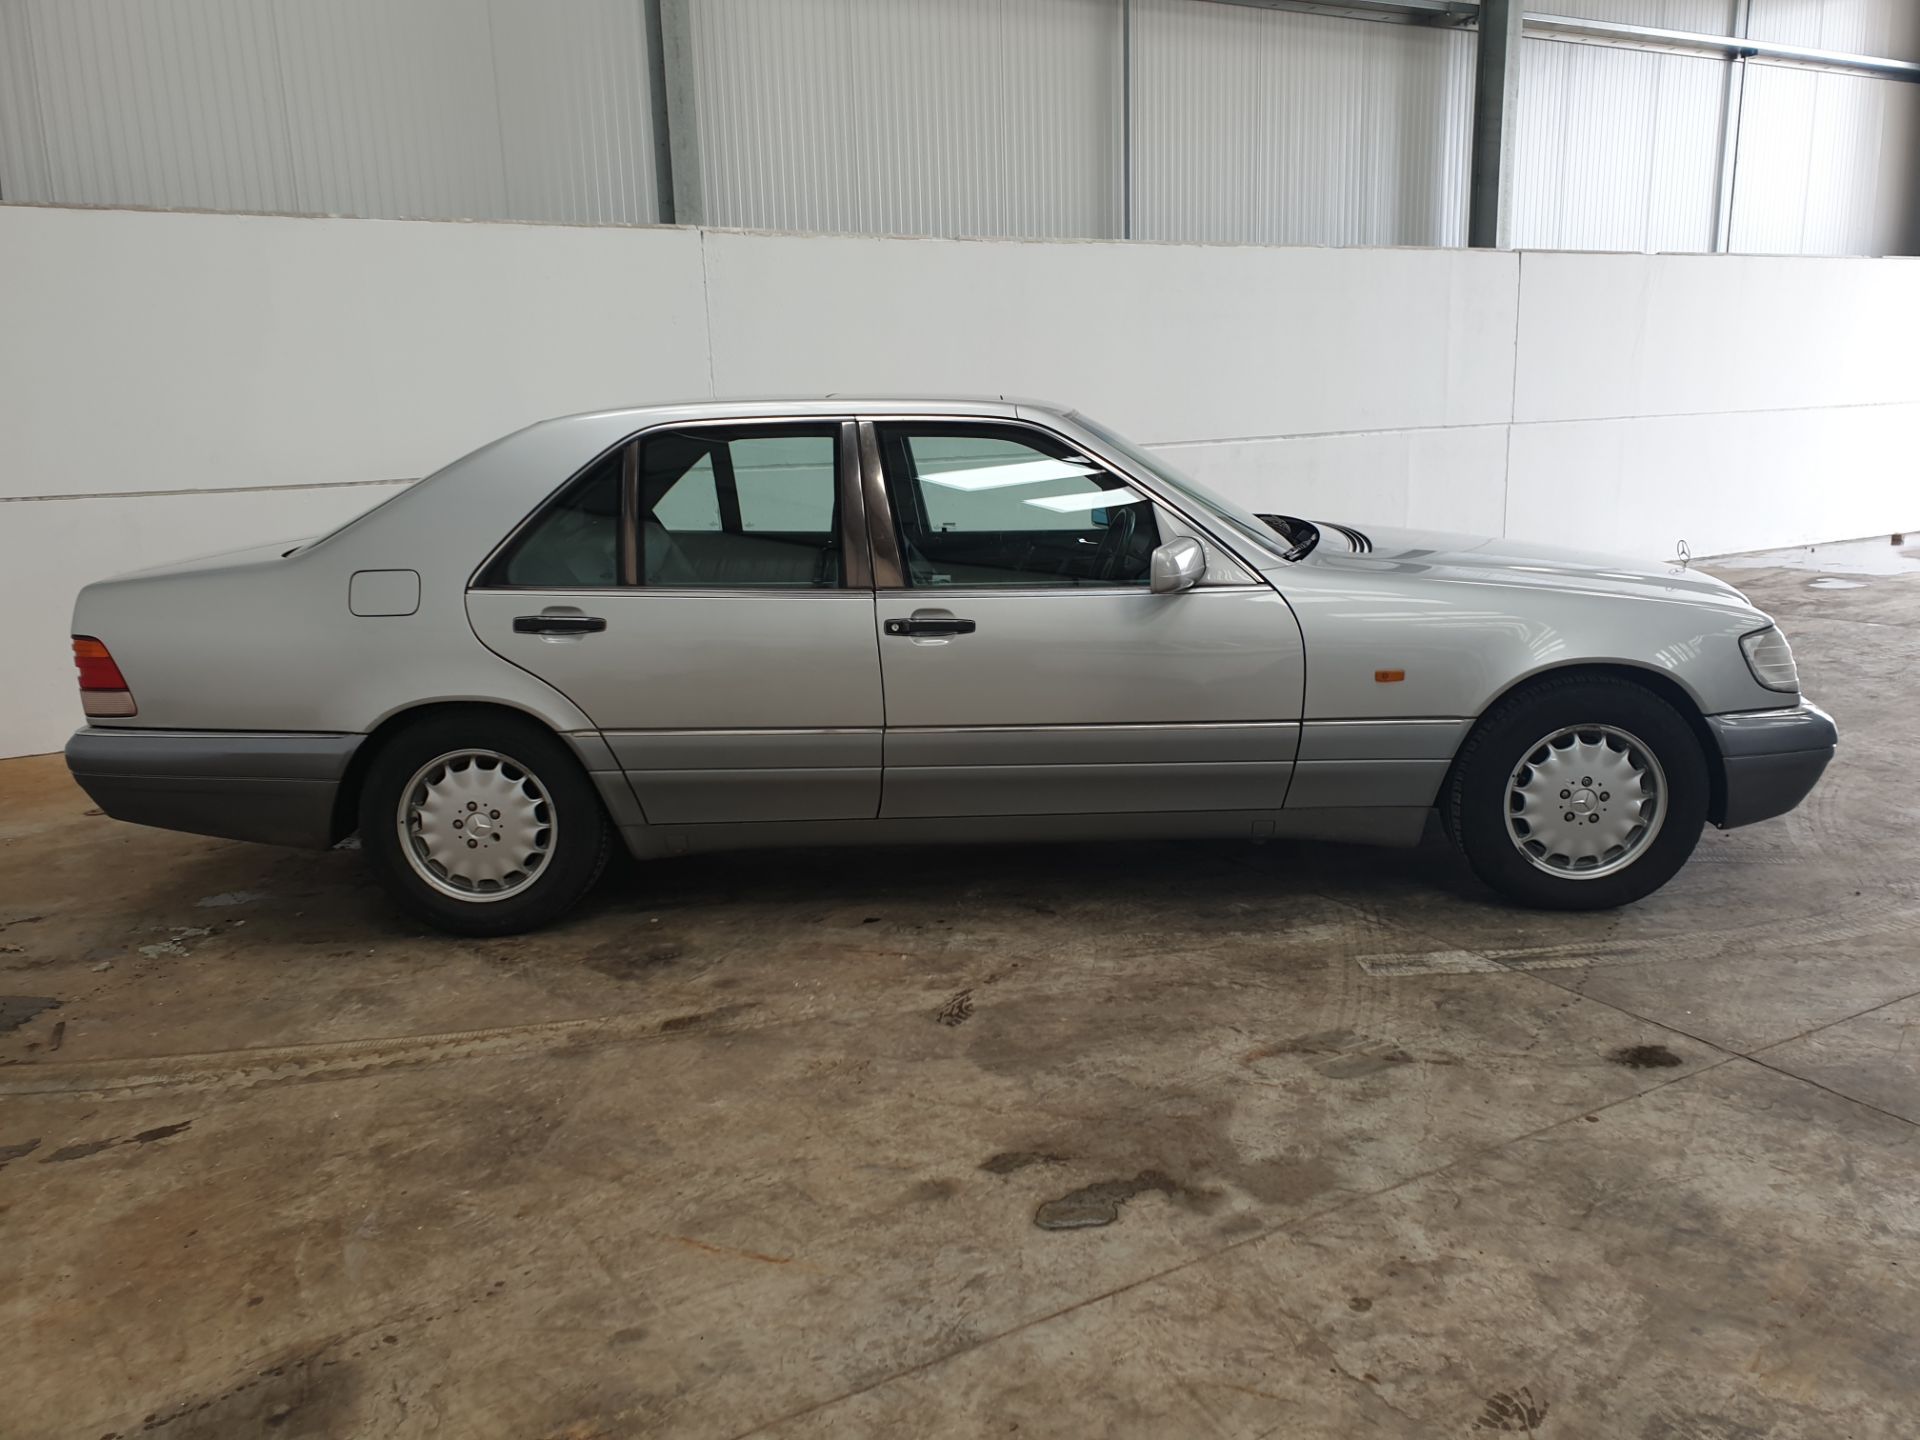 1995 Mercedes S280 - Image 2 of 14